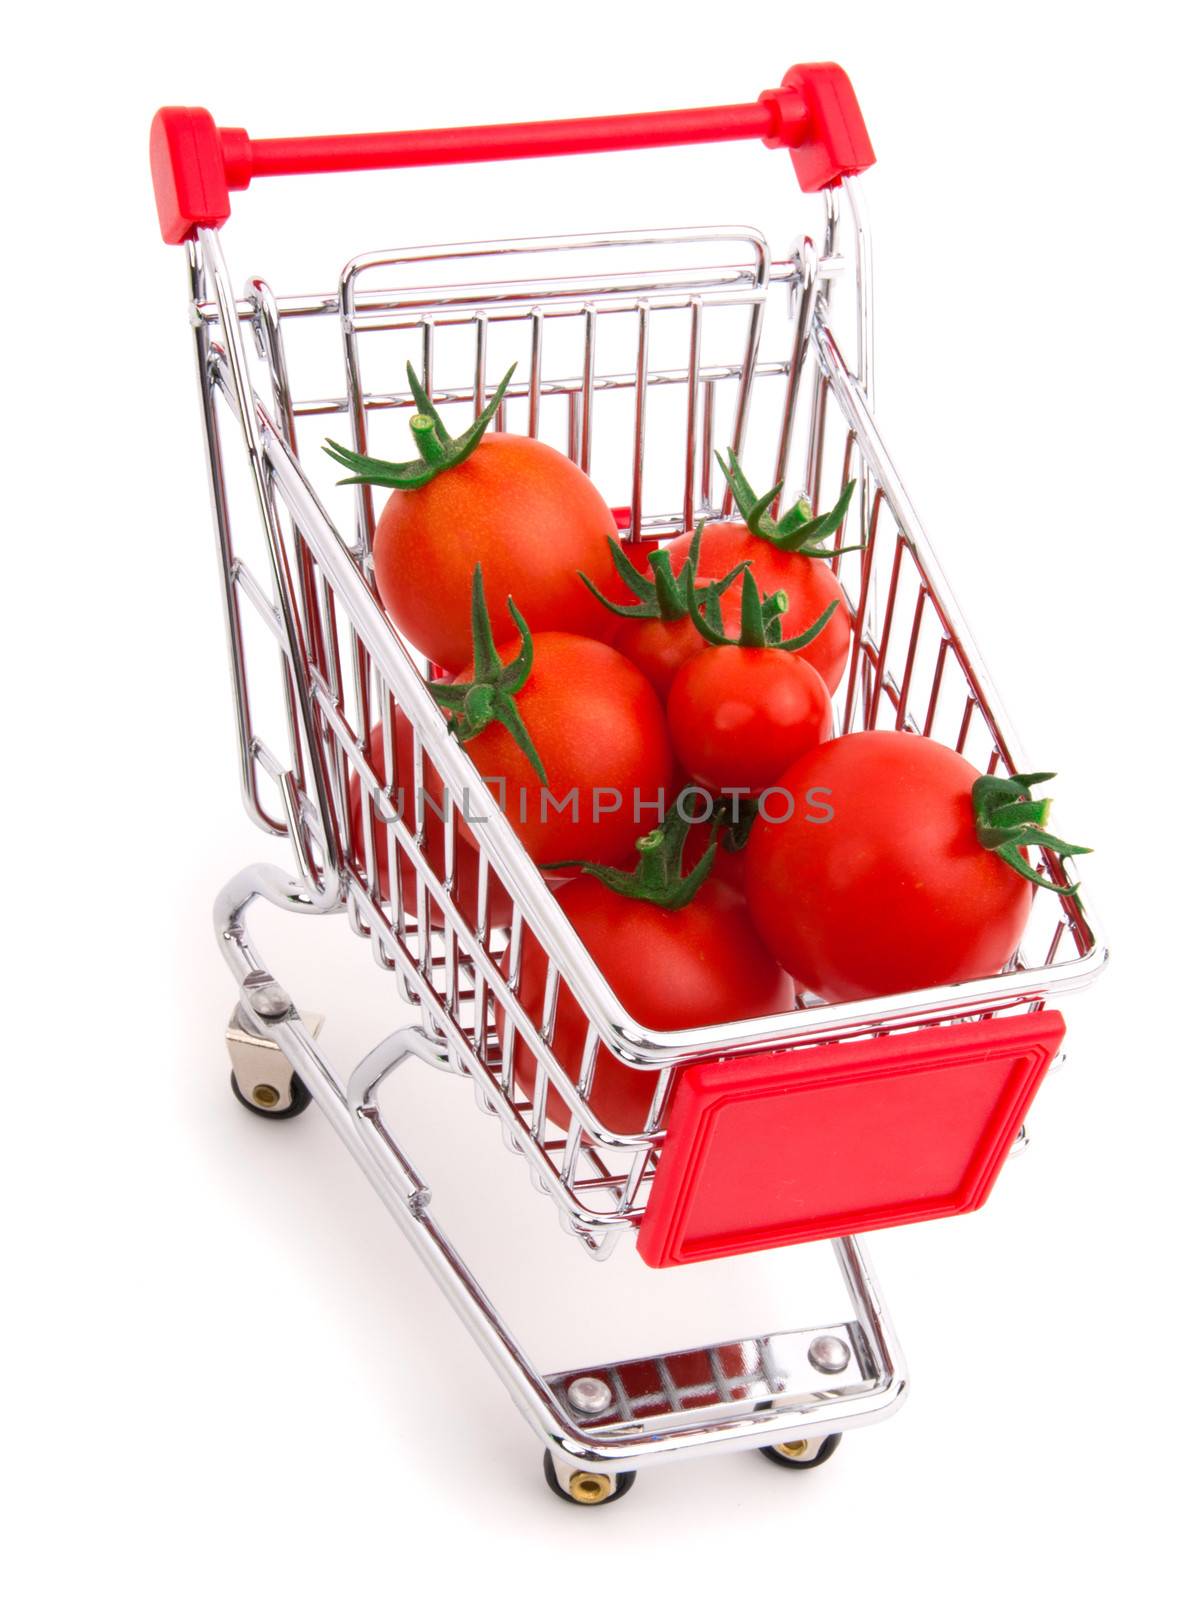 a Shopping cart full of tomatoes on a white background by motorolka